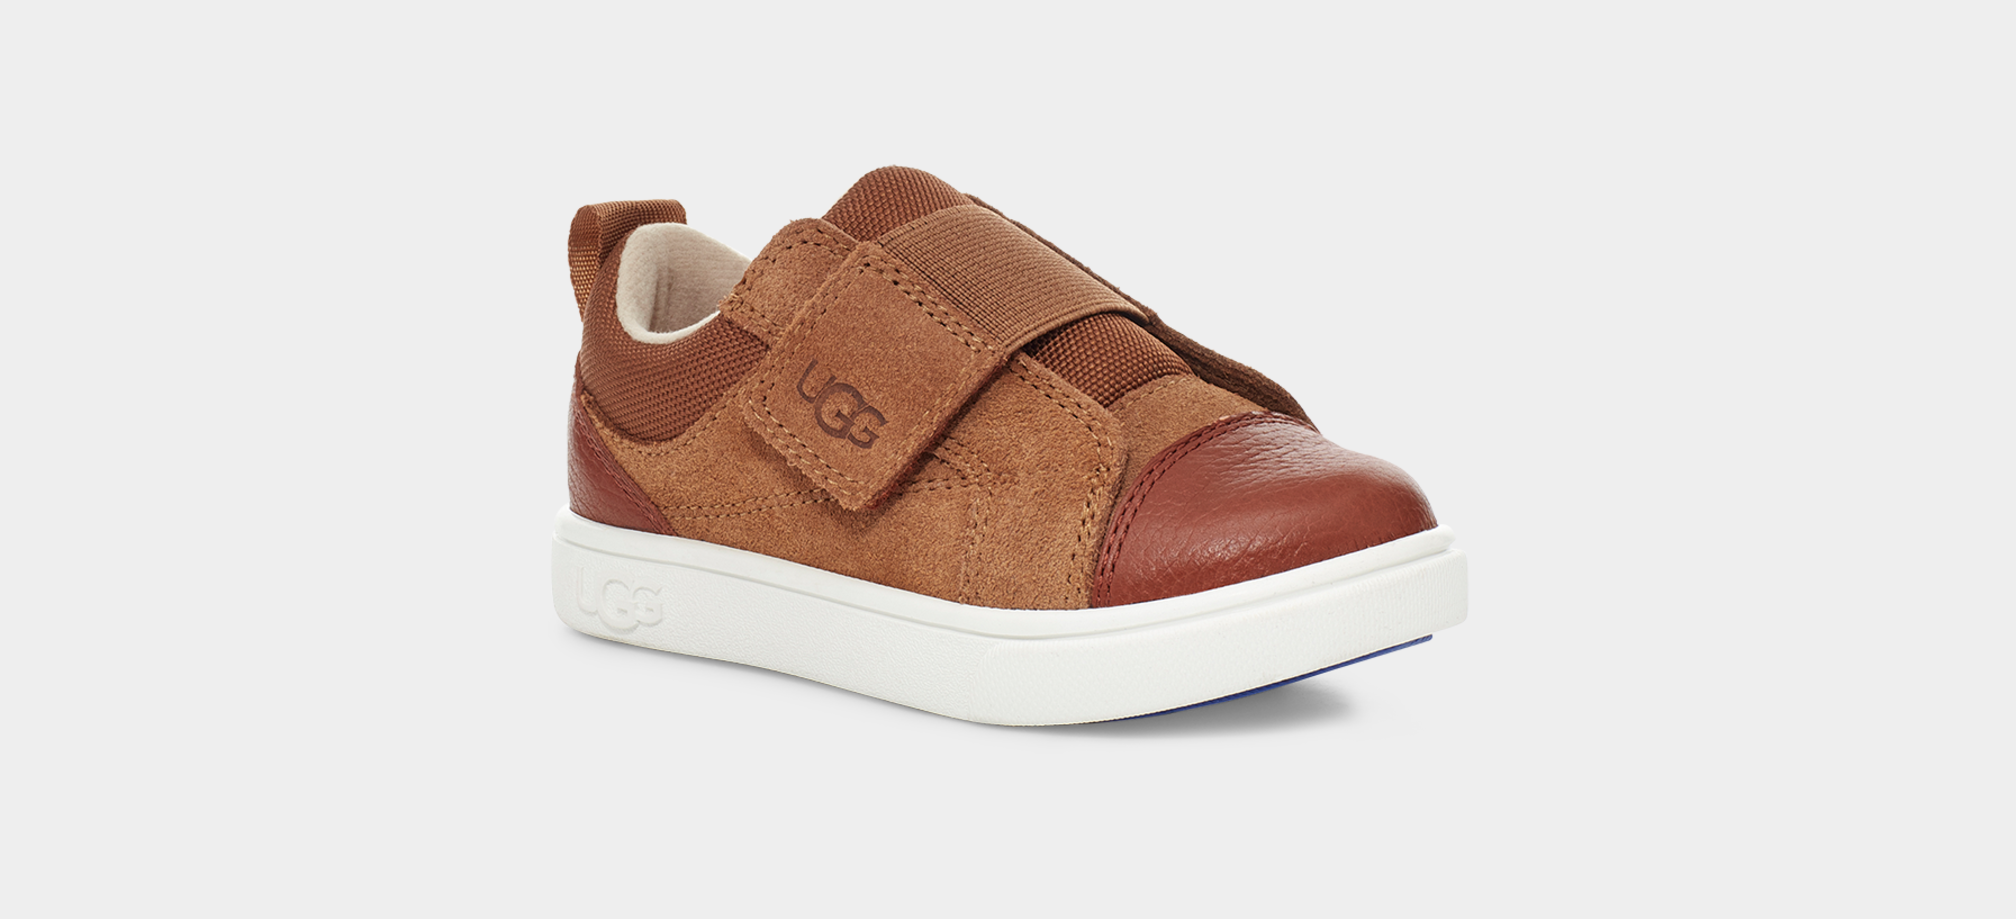 Rennon Low Shoe for Toddlers | UGG